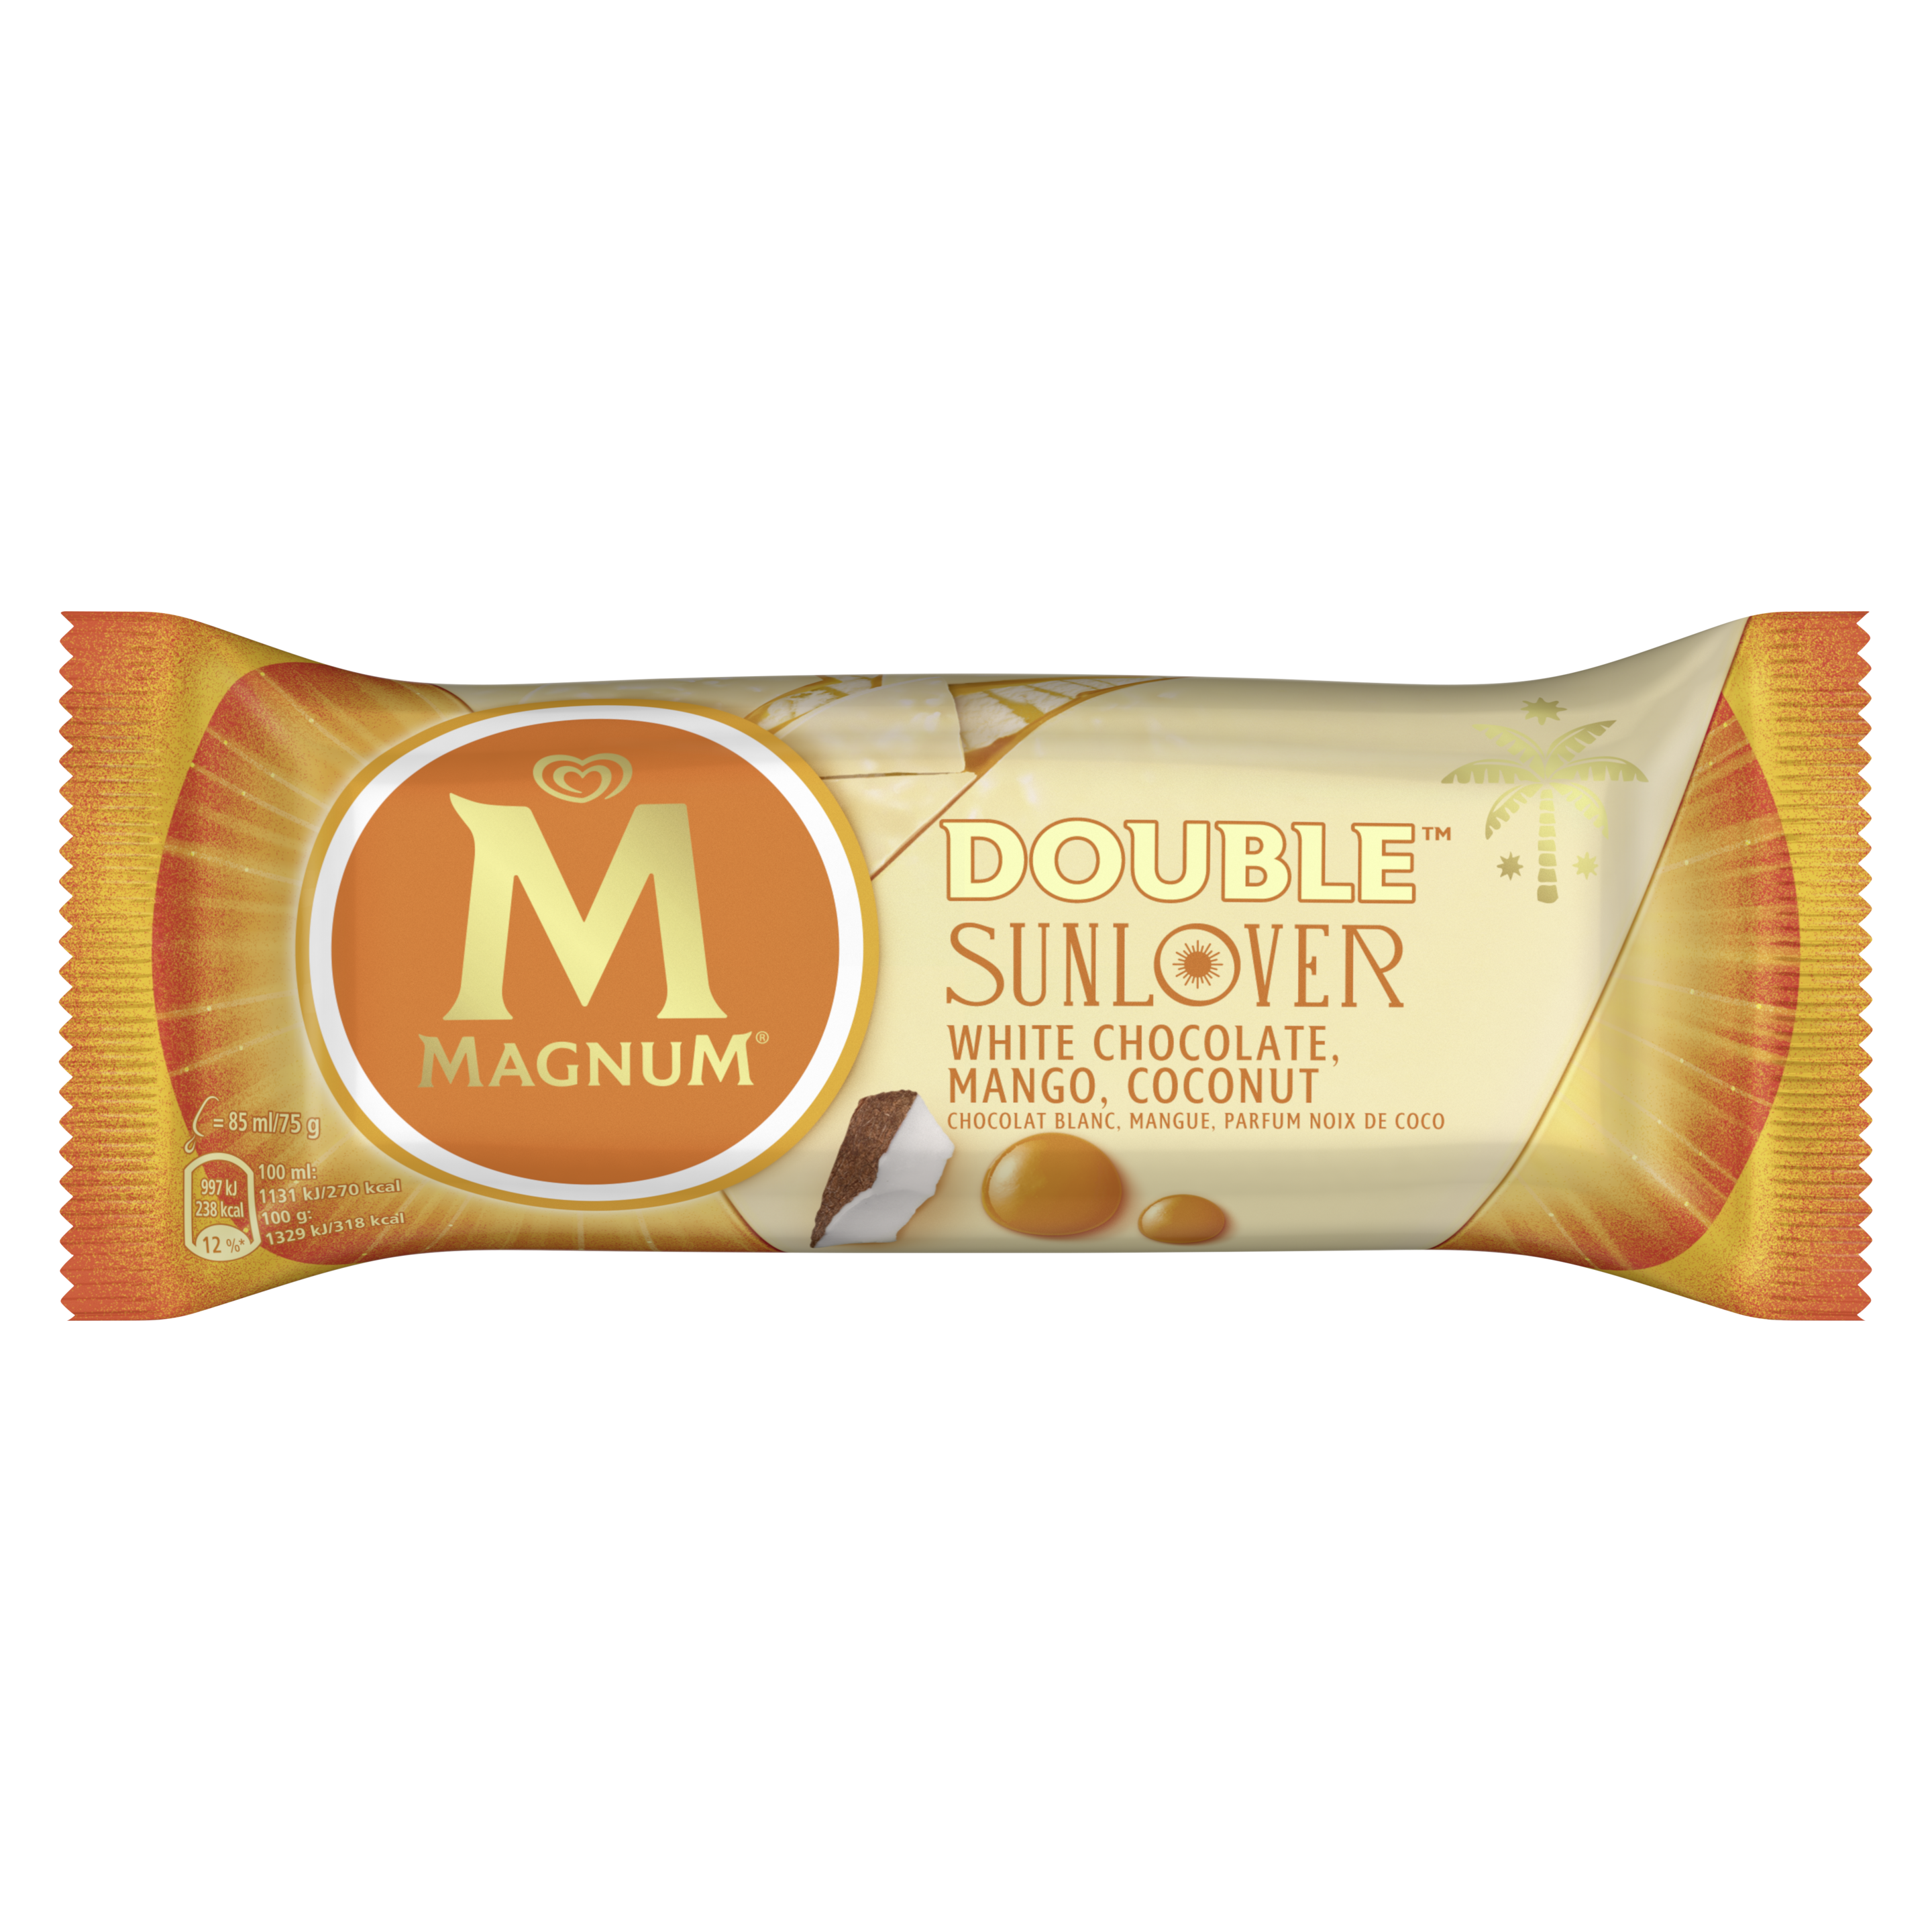 Magnum Double Sunlover x4